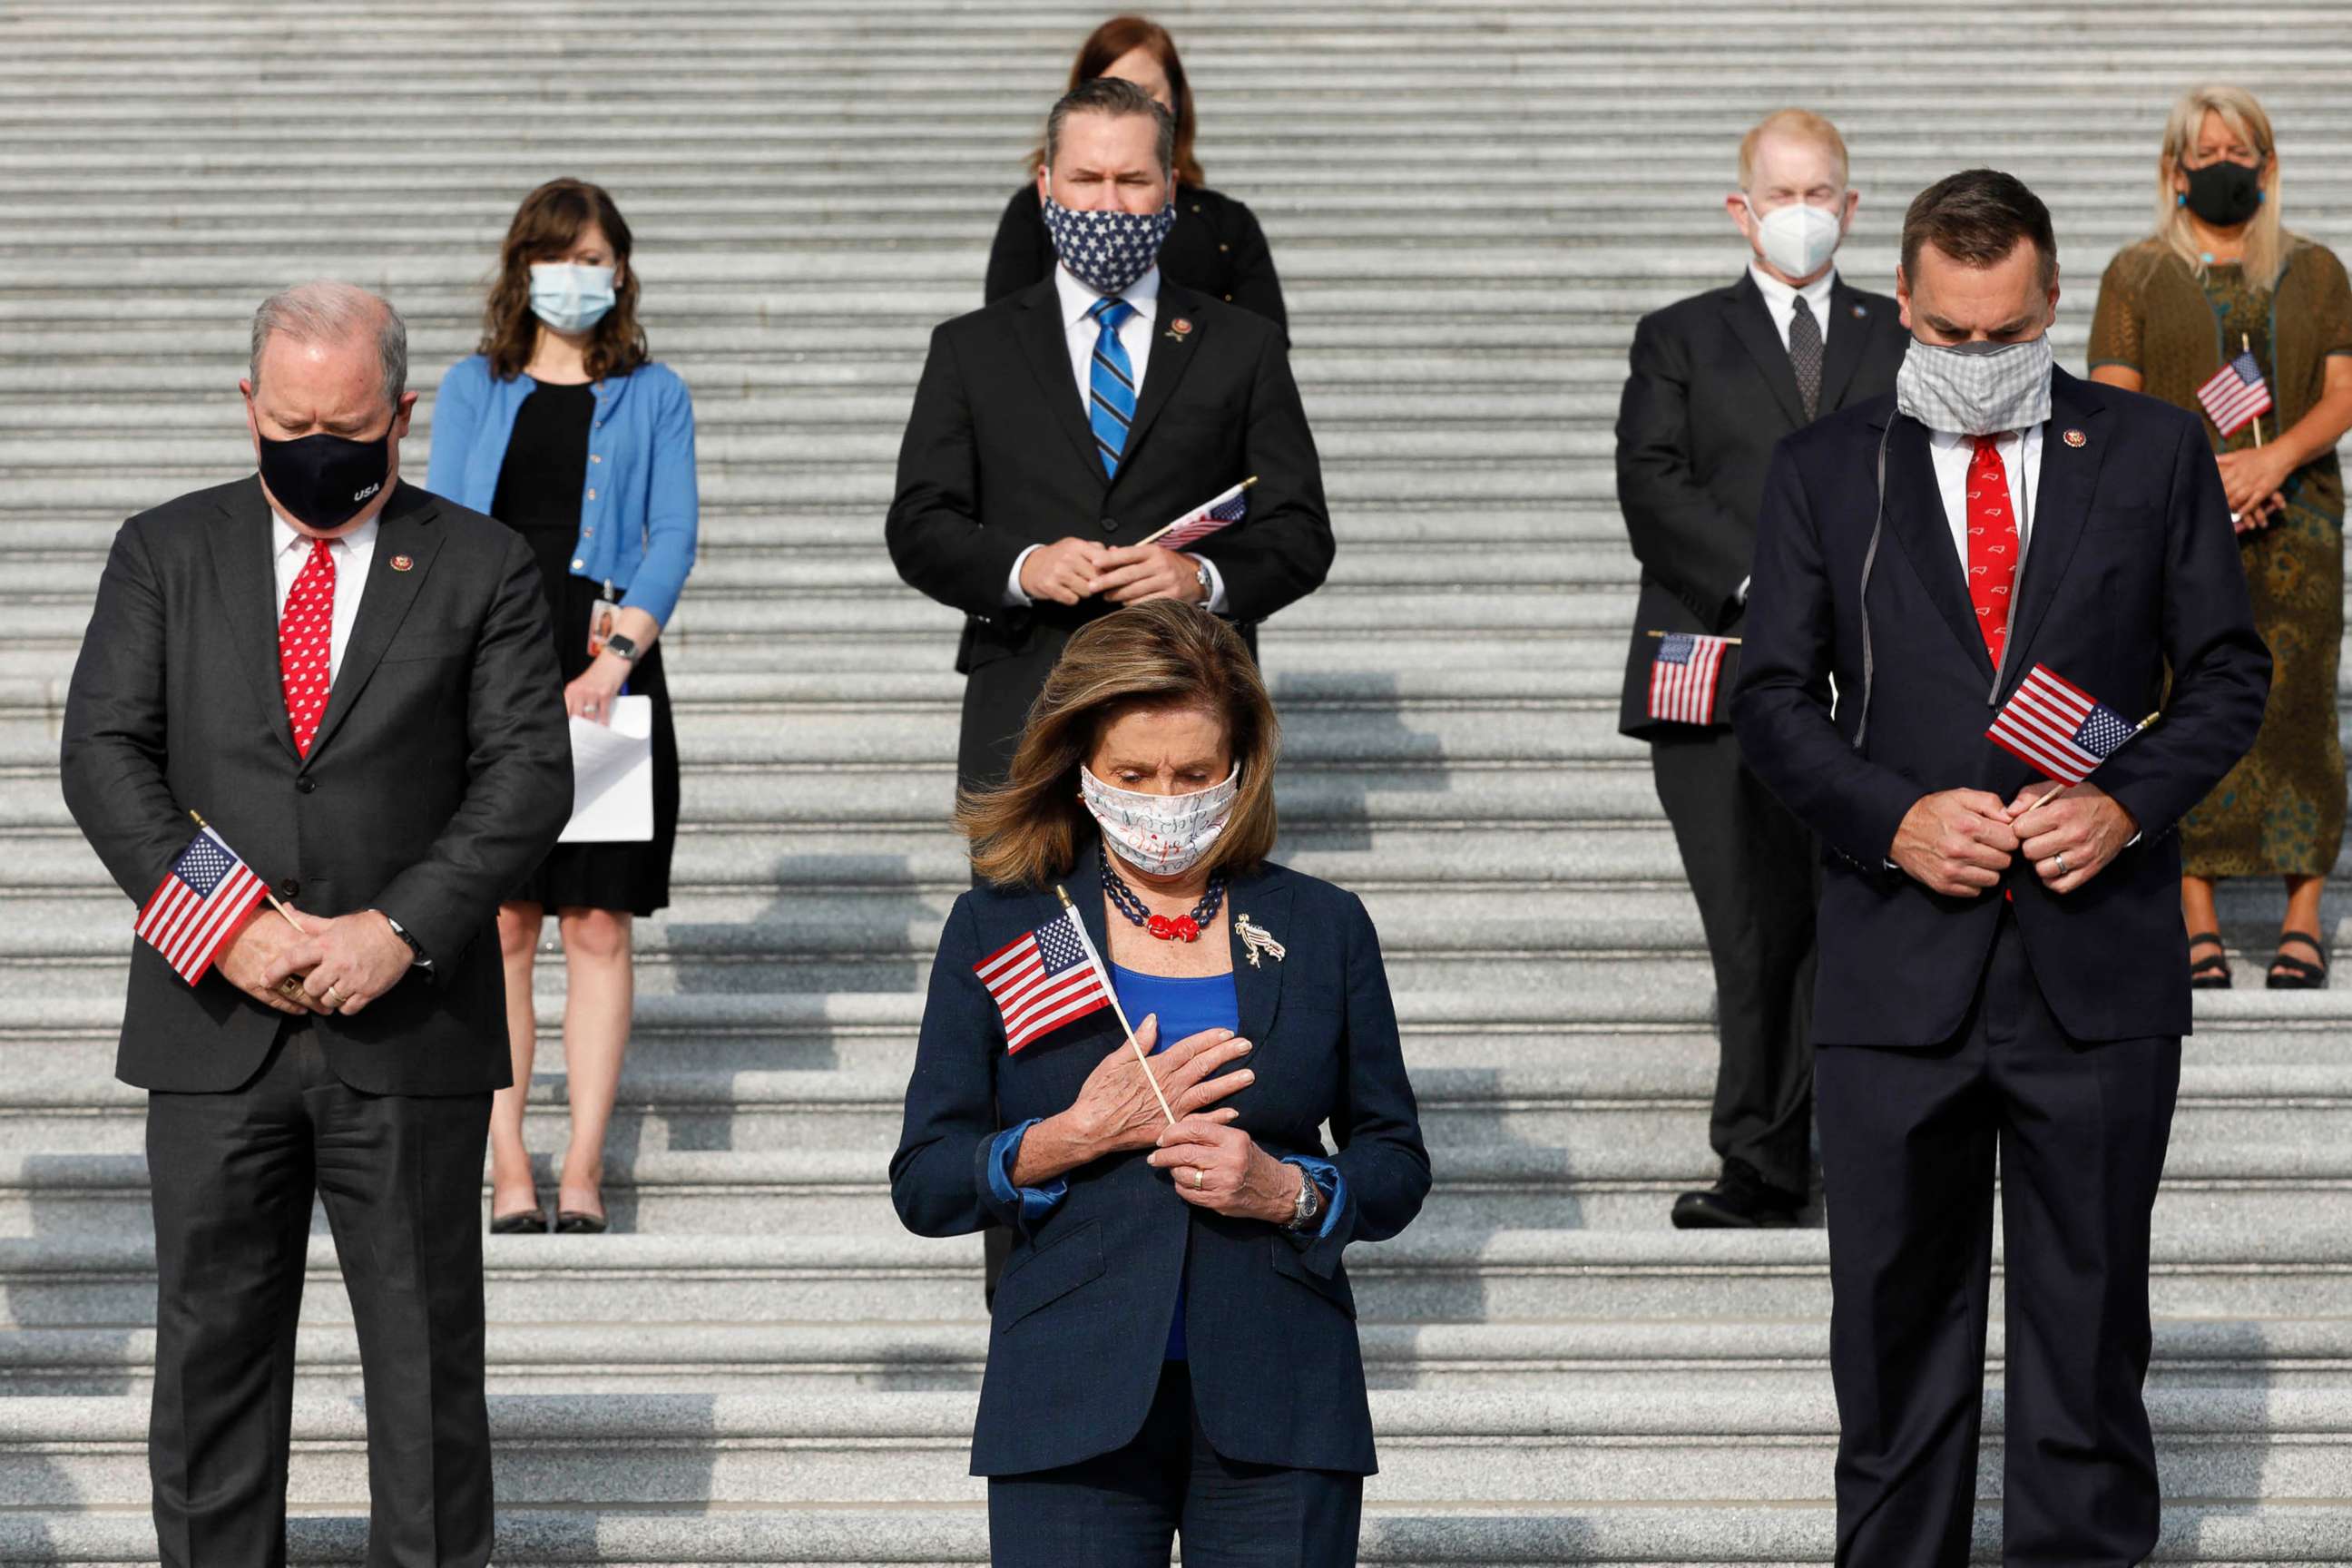 PHOTO: House Speaker Nancy Pelosi and members of Congress hold moment of silence observing National Day of Service and Remembrance on the East Front Steps on Capitol Hill in Washington on Sept. 11, 2020.